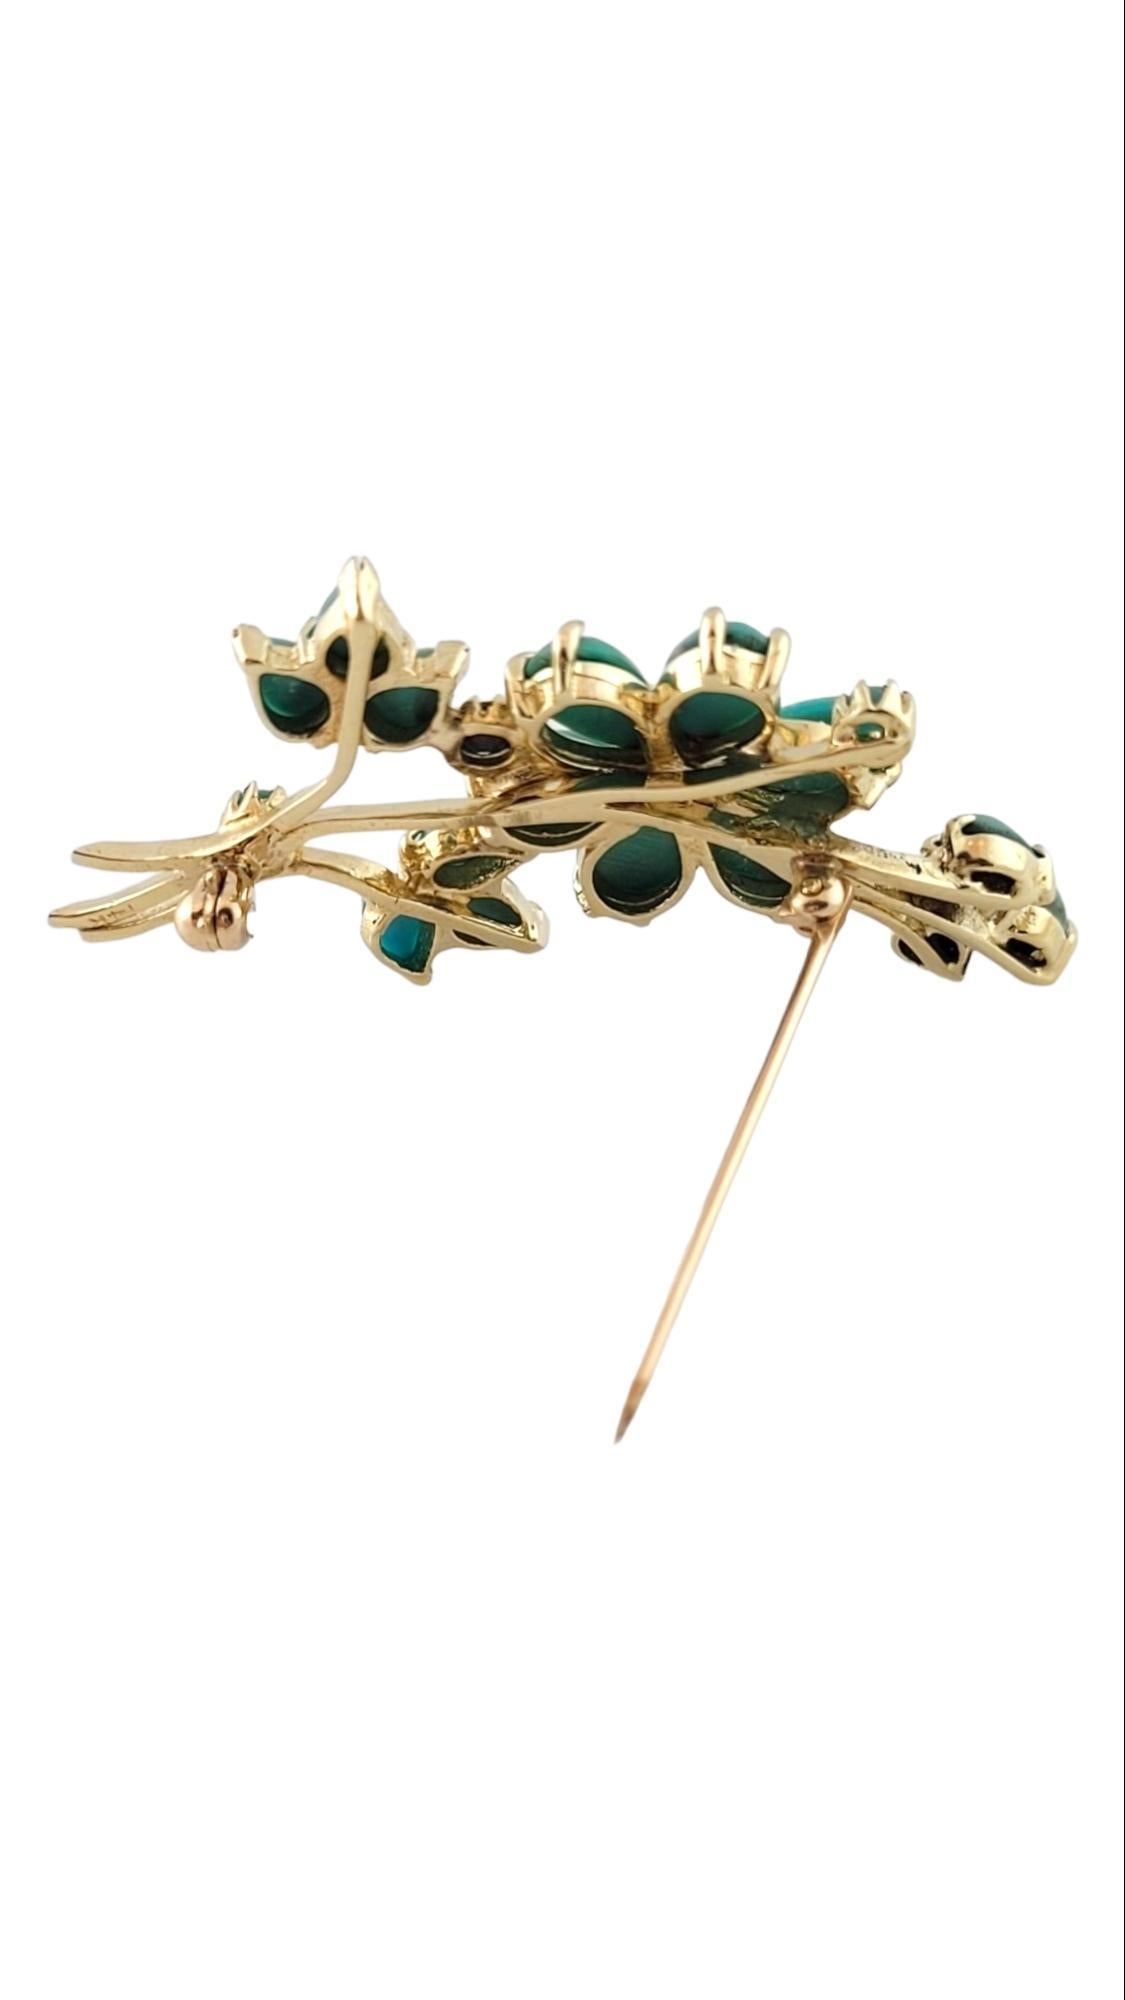 Women's 14K Yellow Gold Flower Pin with Turquoise Stones #15186 For Sale